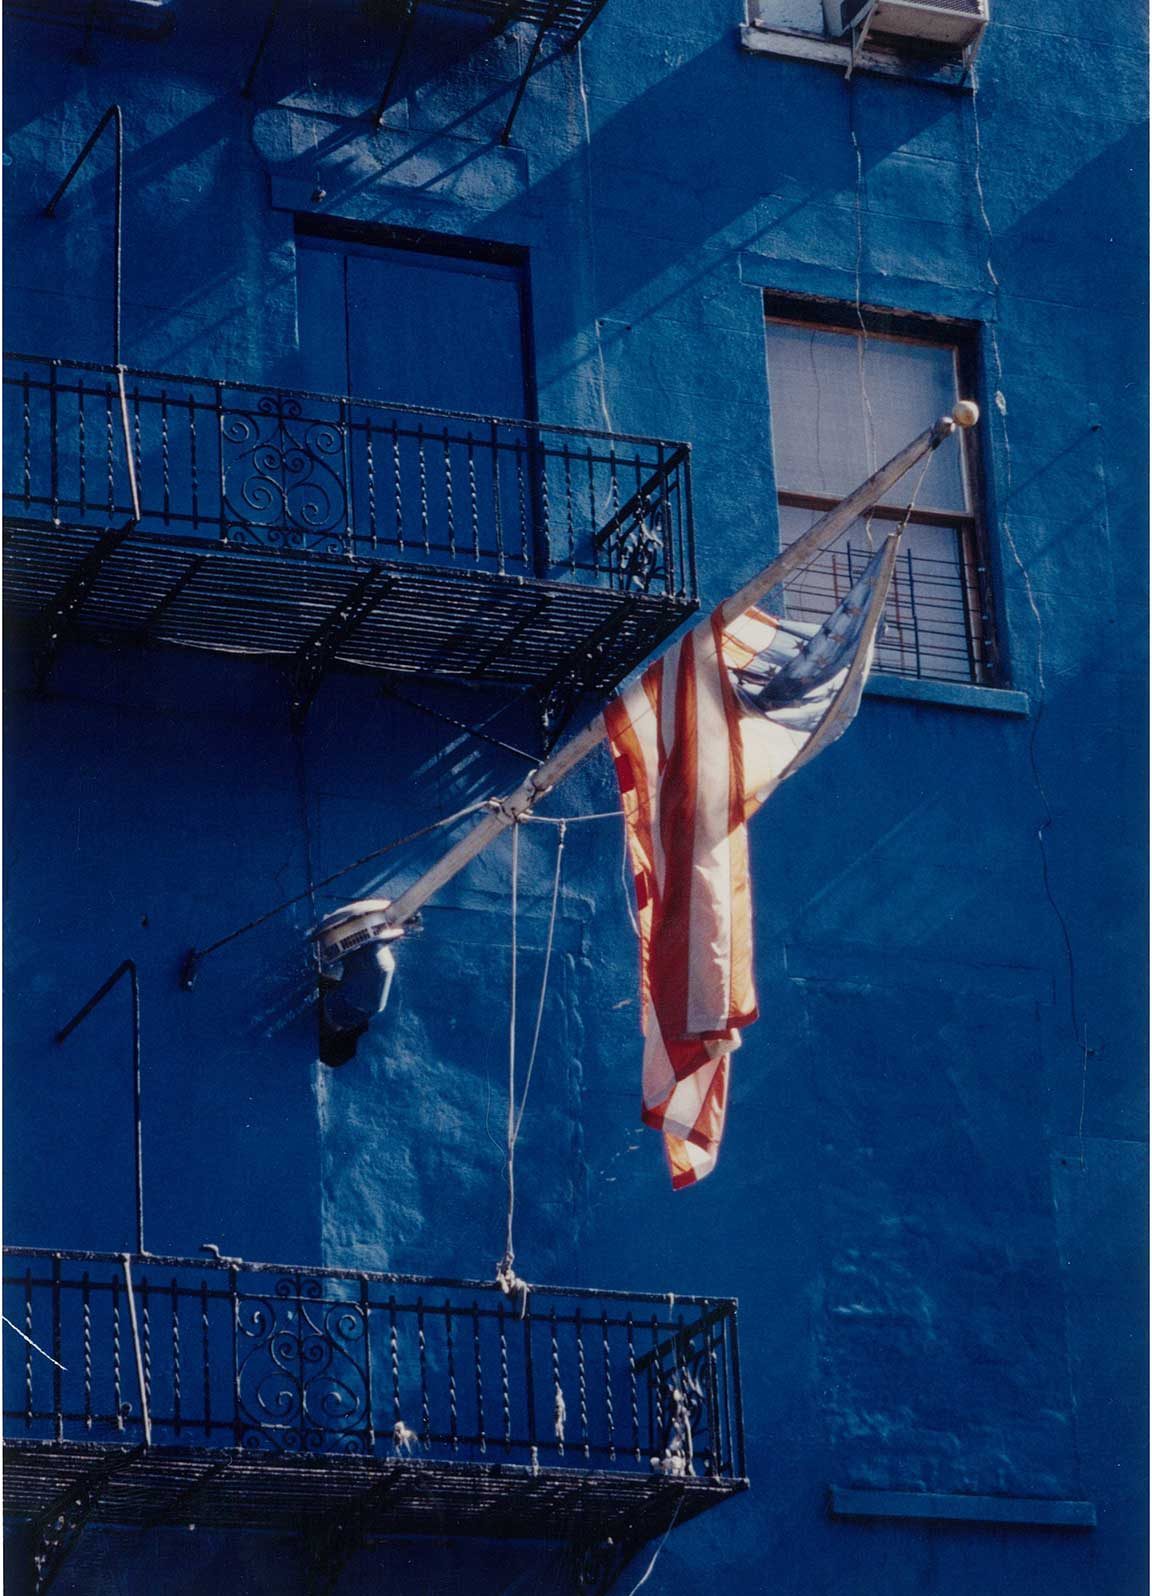 light shines on a faded hanging hanging on a pole on the side of a blue building